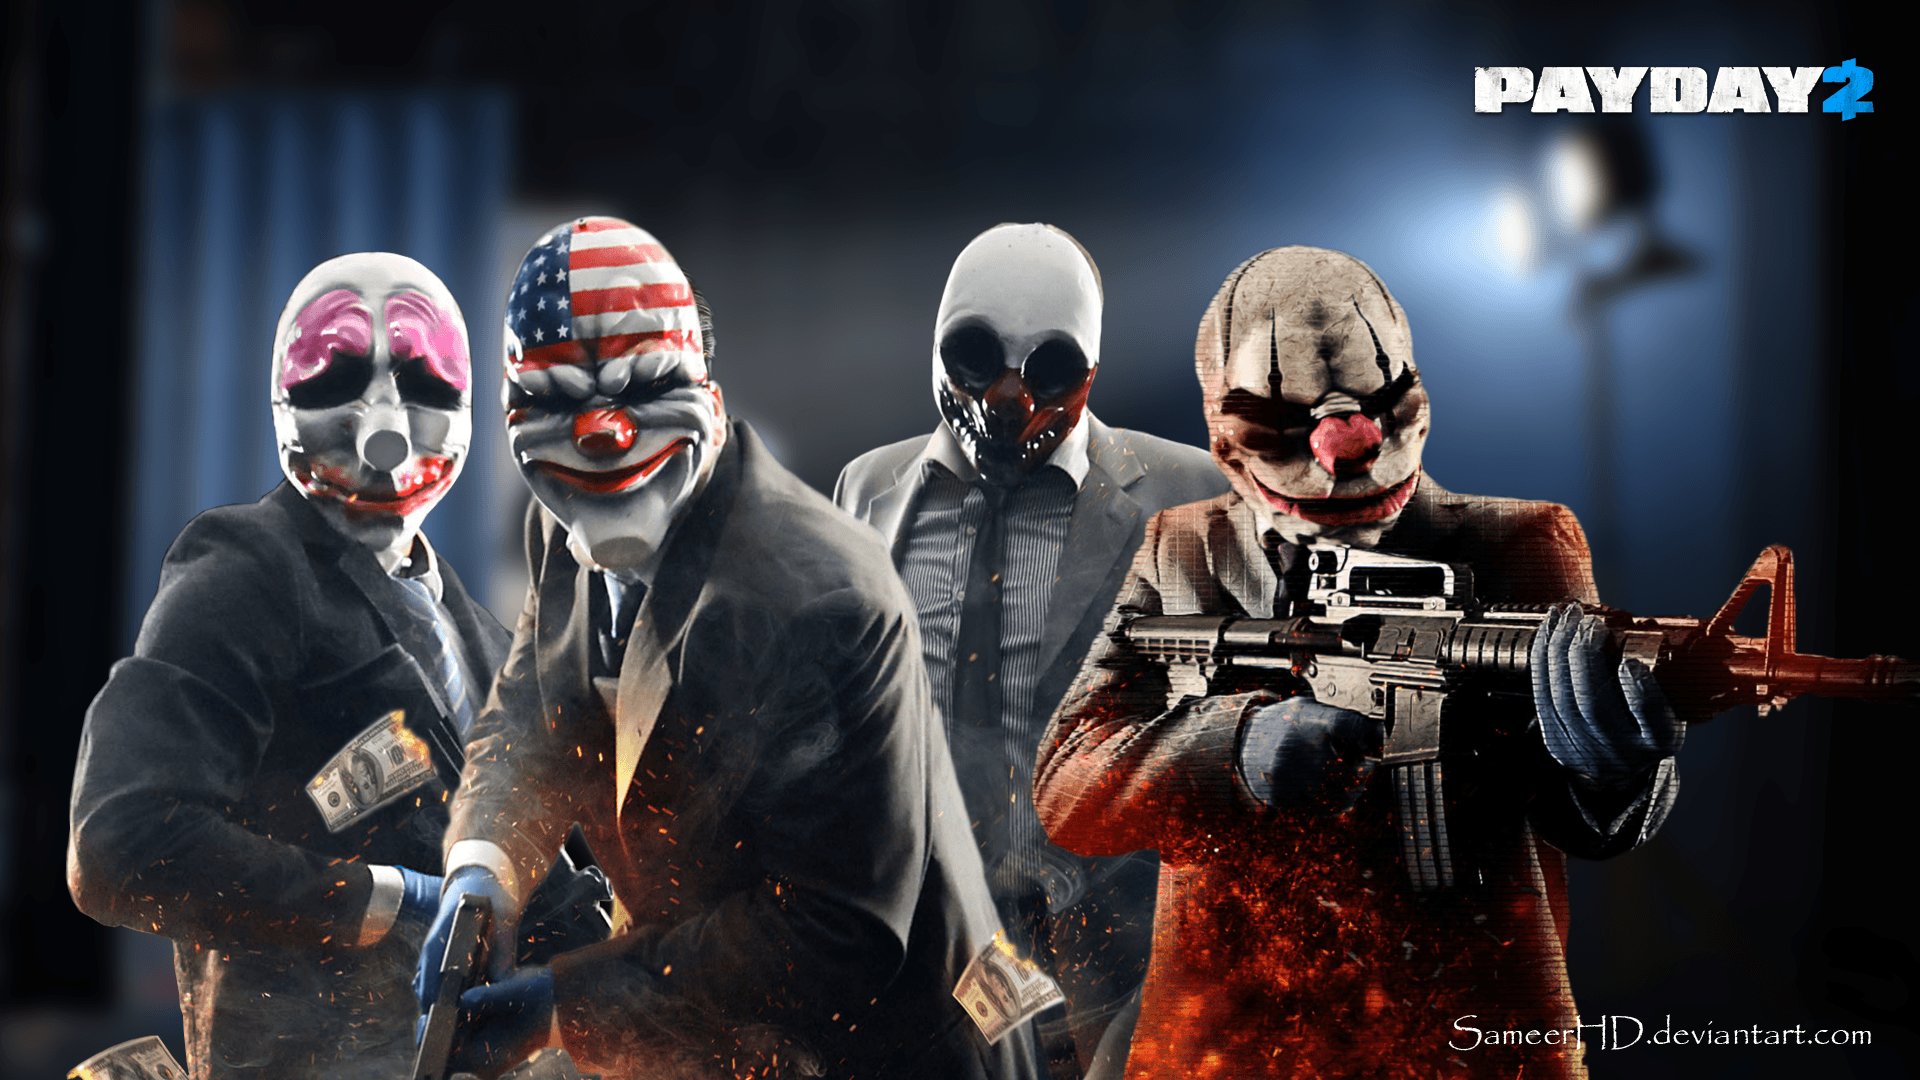 payday 2 free download pc multiplayer